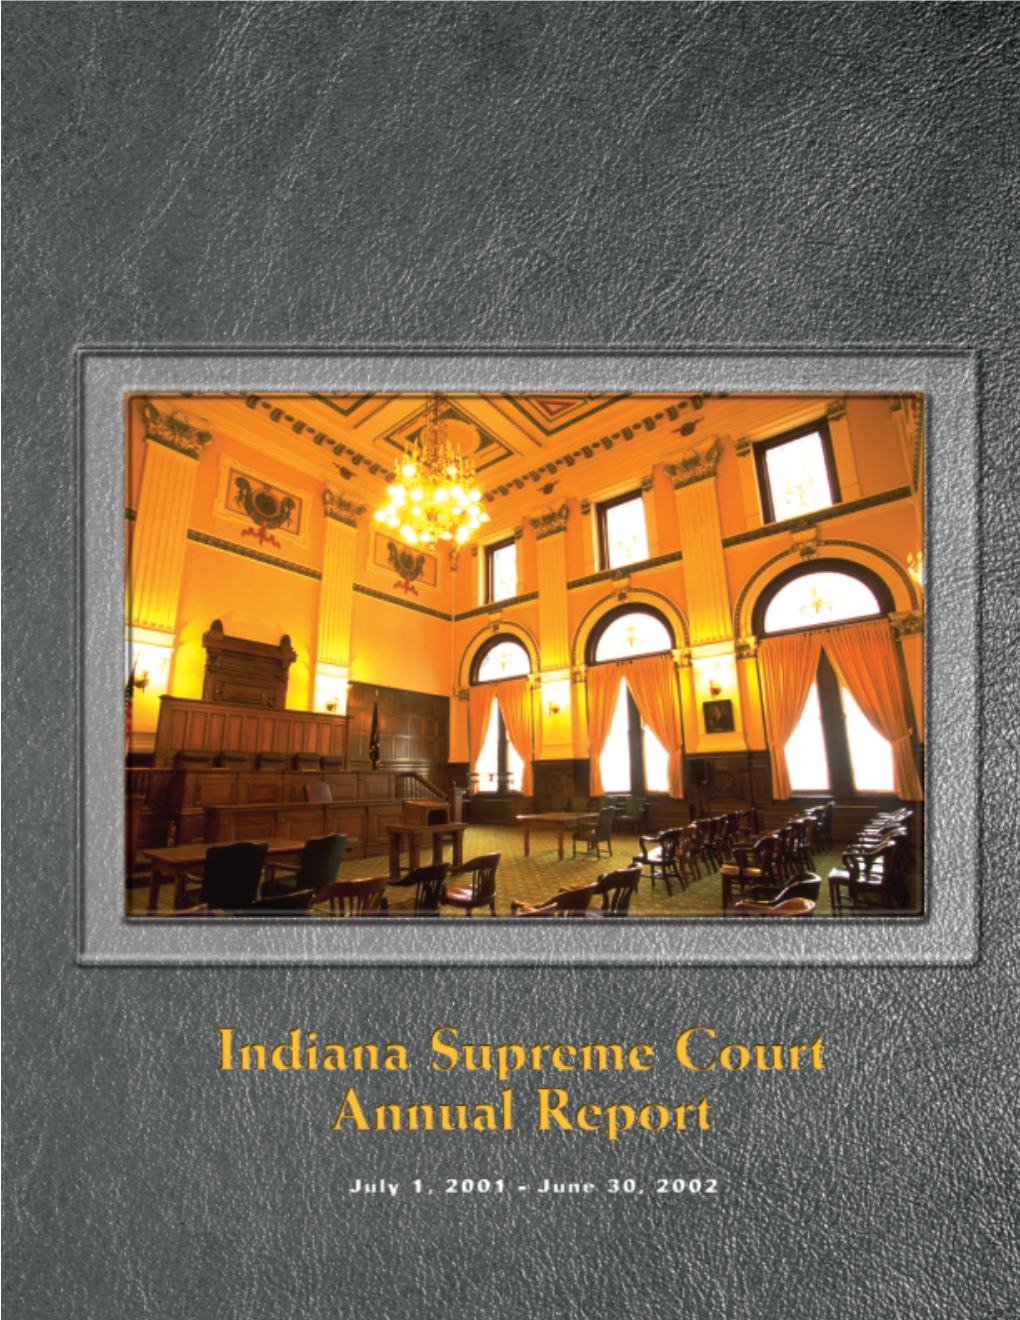 C. Indiana Supreme Court Disciplinary Commission